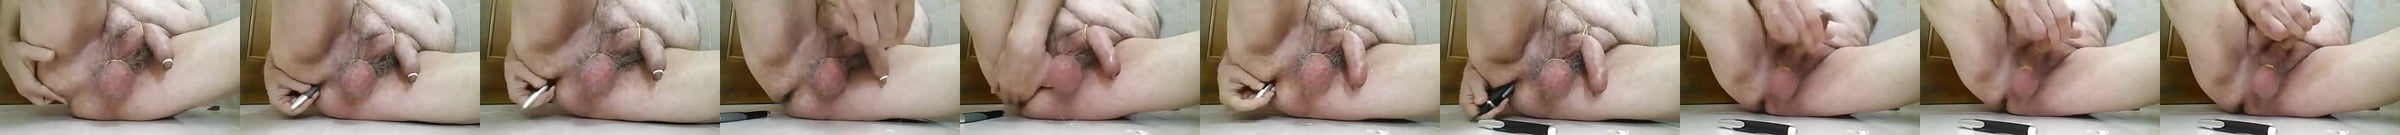 Self Injecting Trimix Into Penis Take Two Free Gay Porn 16 Xhamster